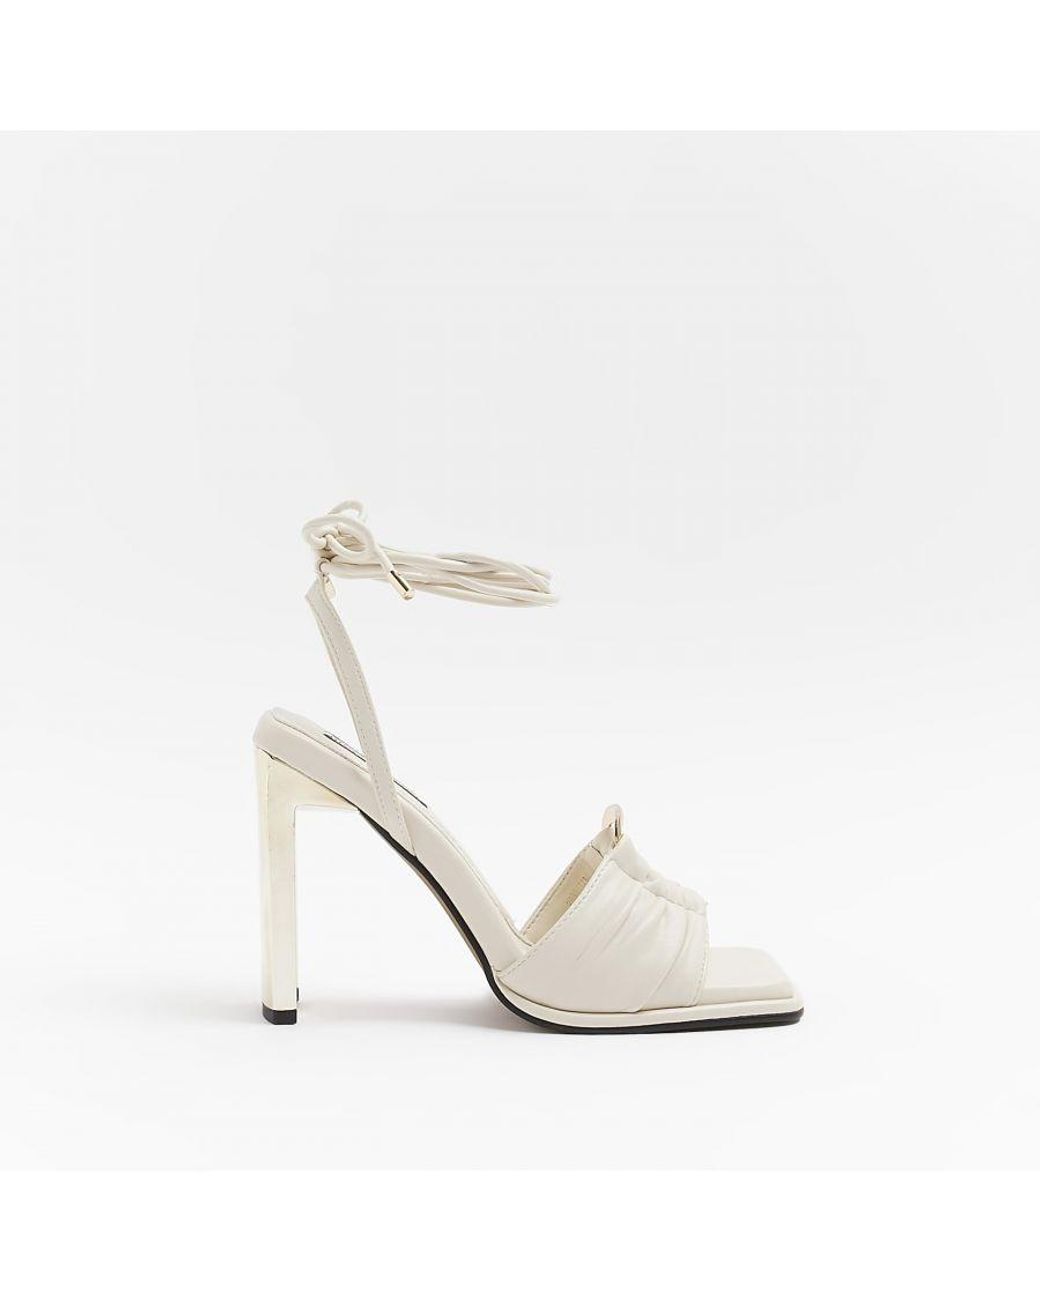 River Island Sandals in White | Lyst UK